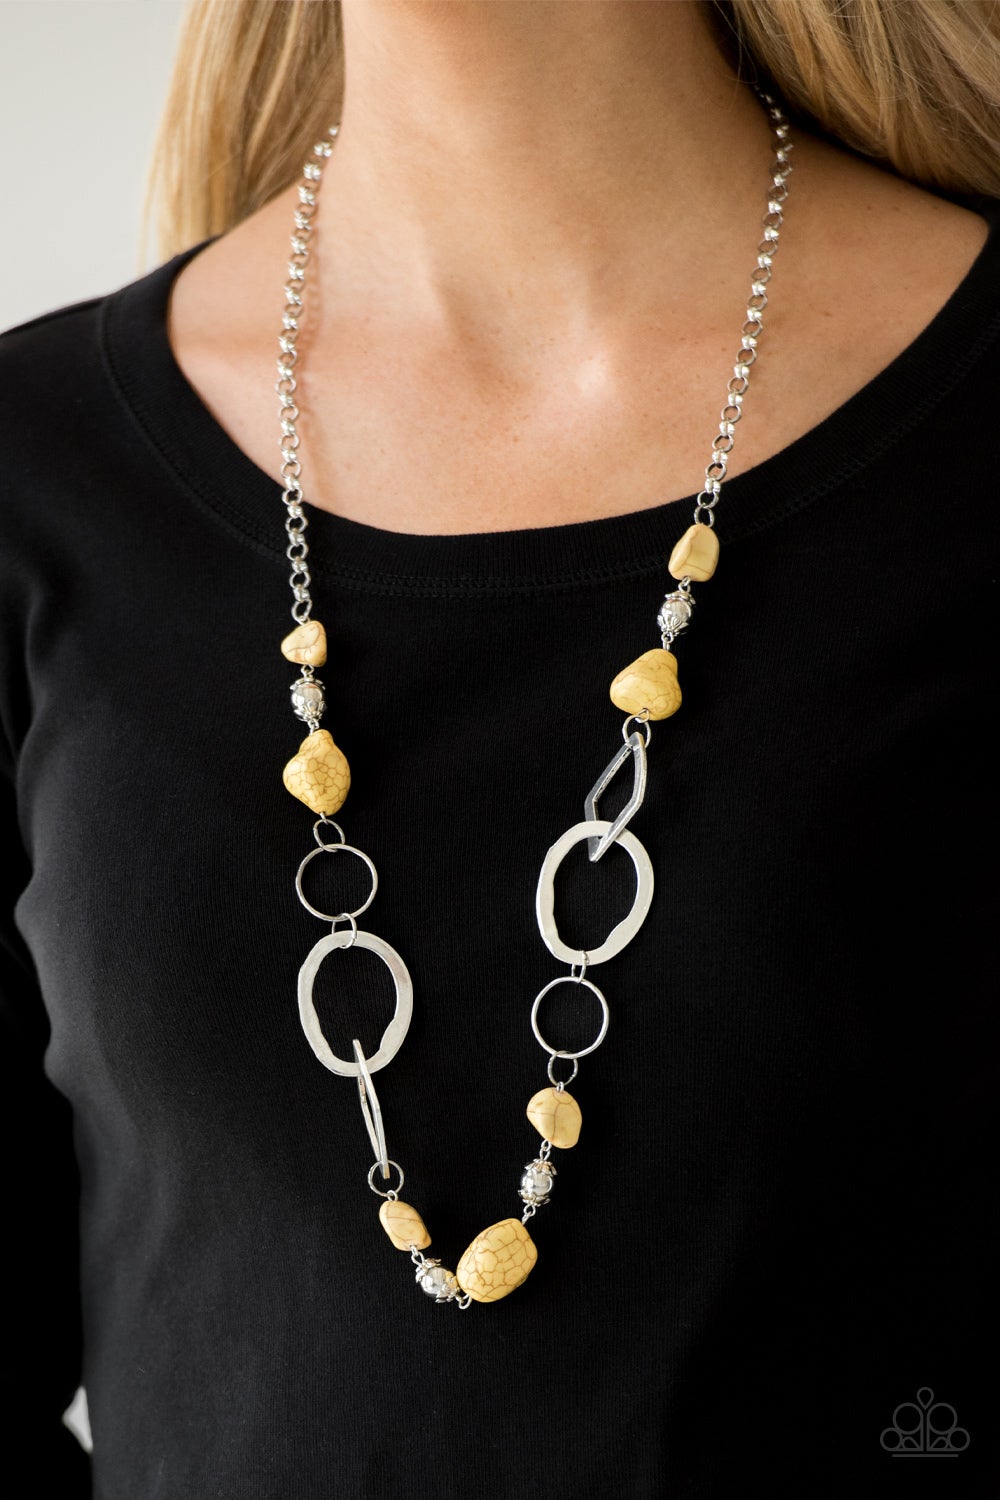 That's TERRA-ific! - Yellow Paparazzi Necklace